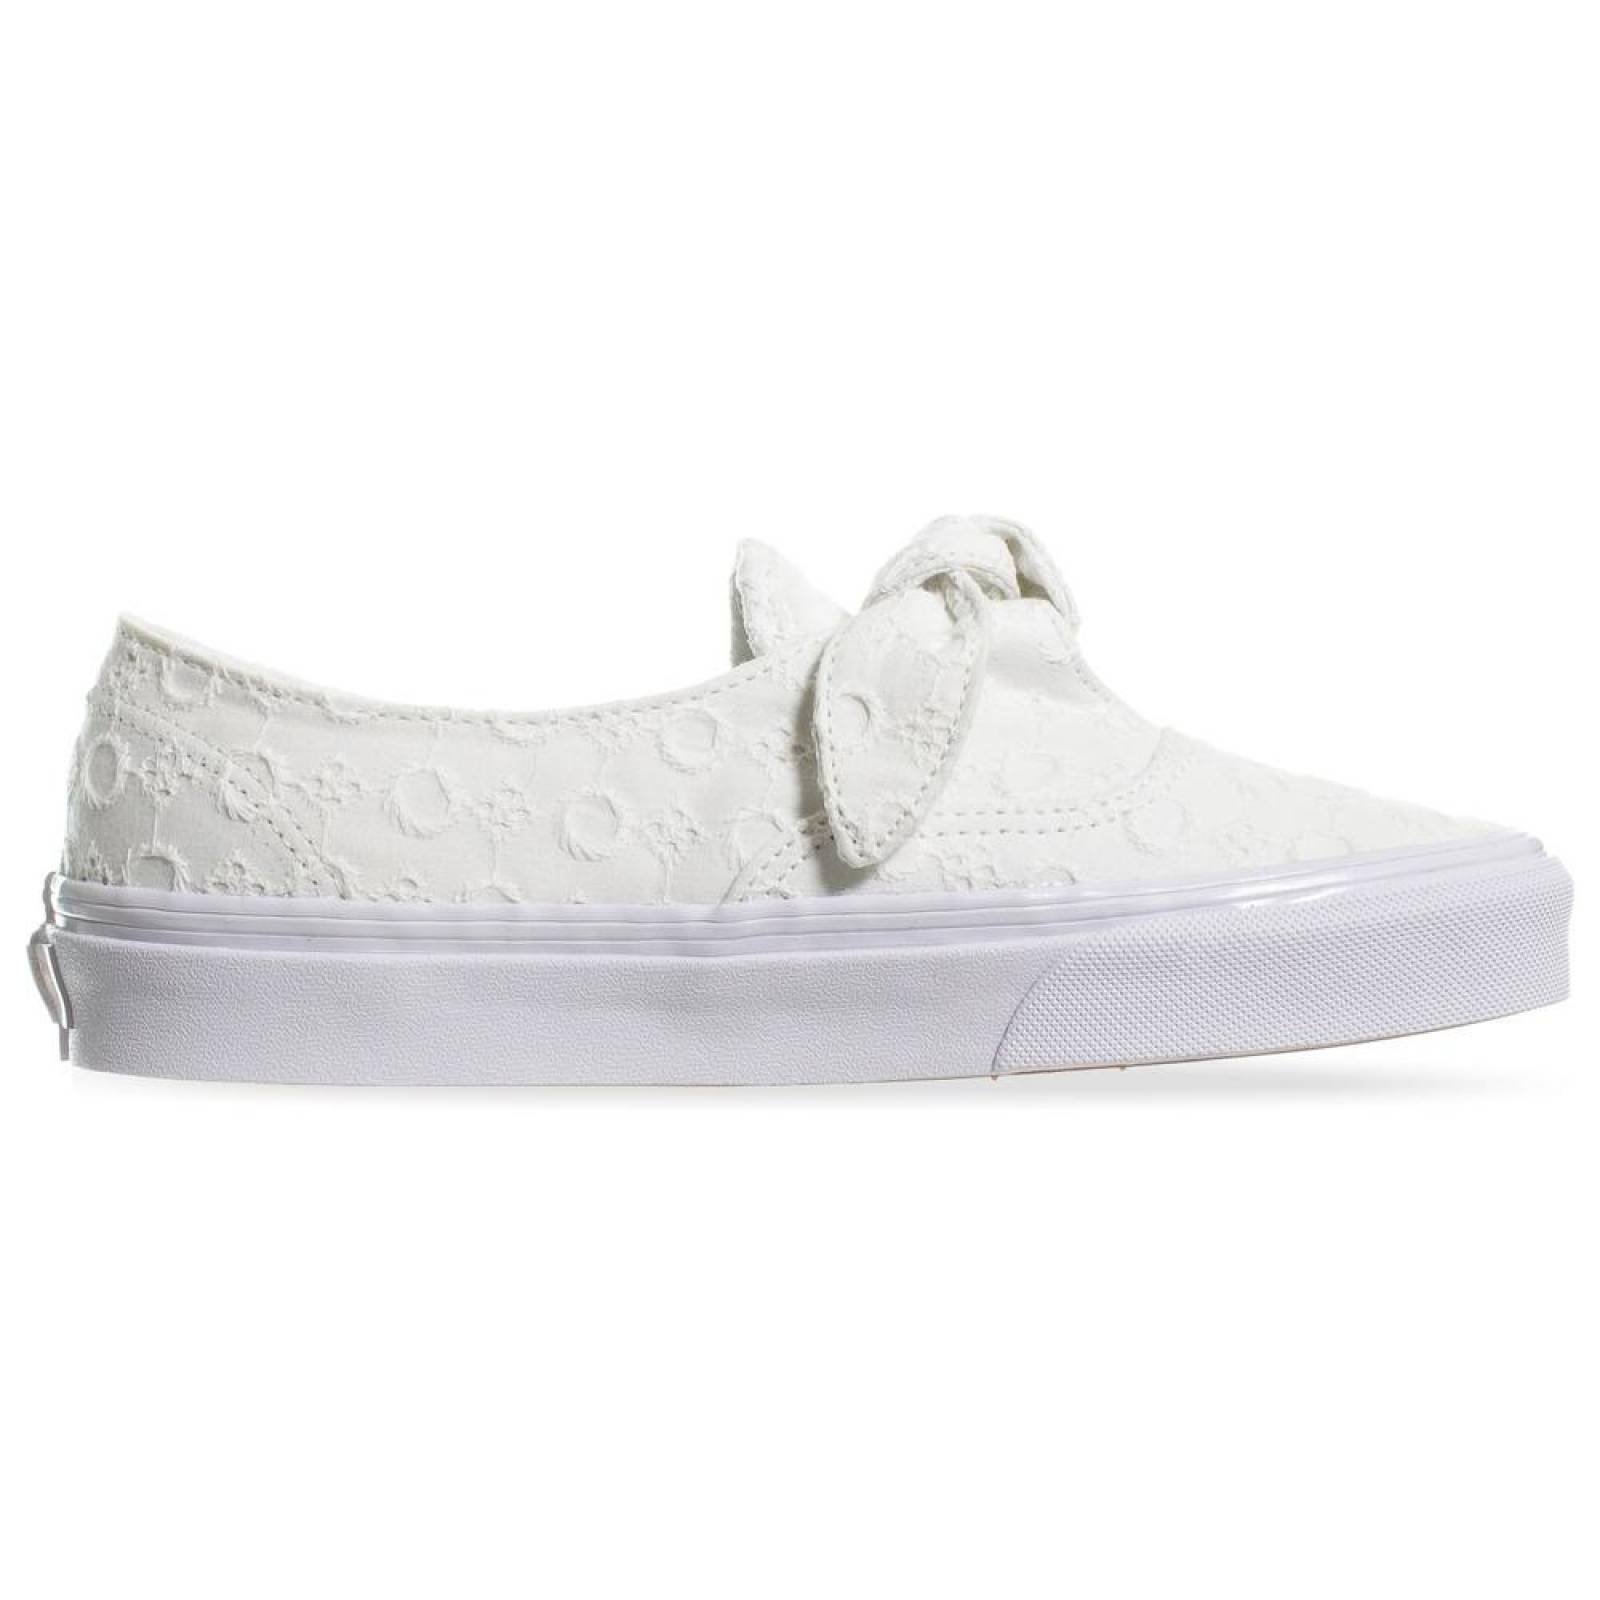 Tenis Vans Authentic Knotted 3MU2VL6 Blanco Mujer